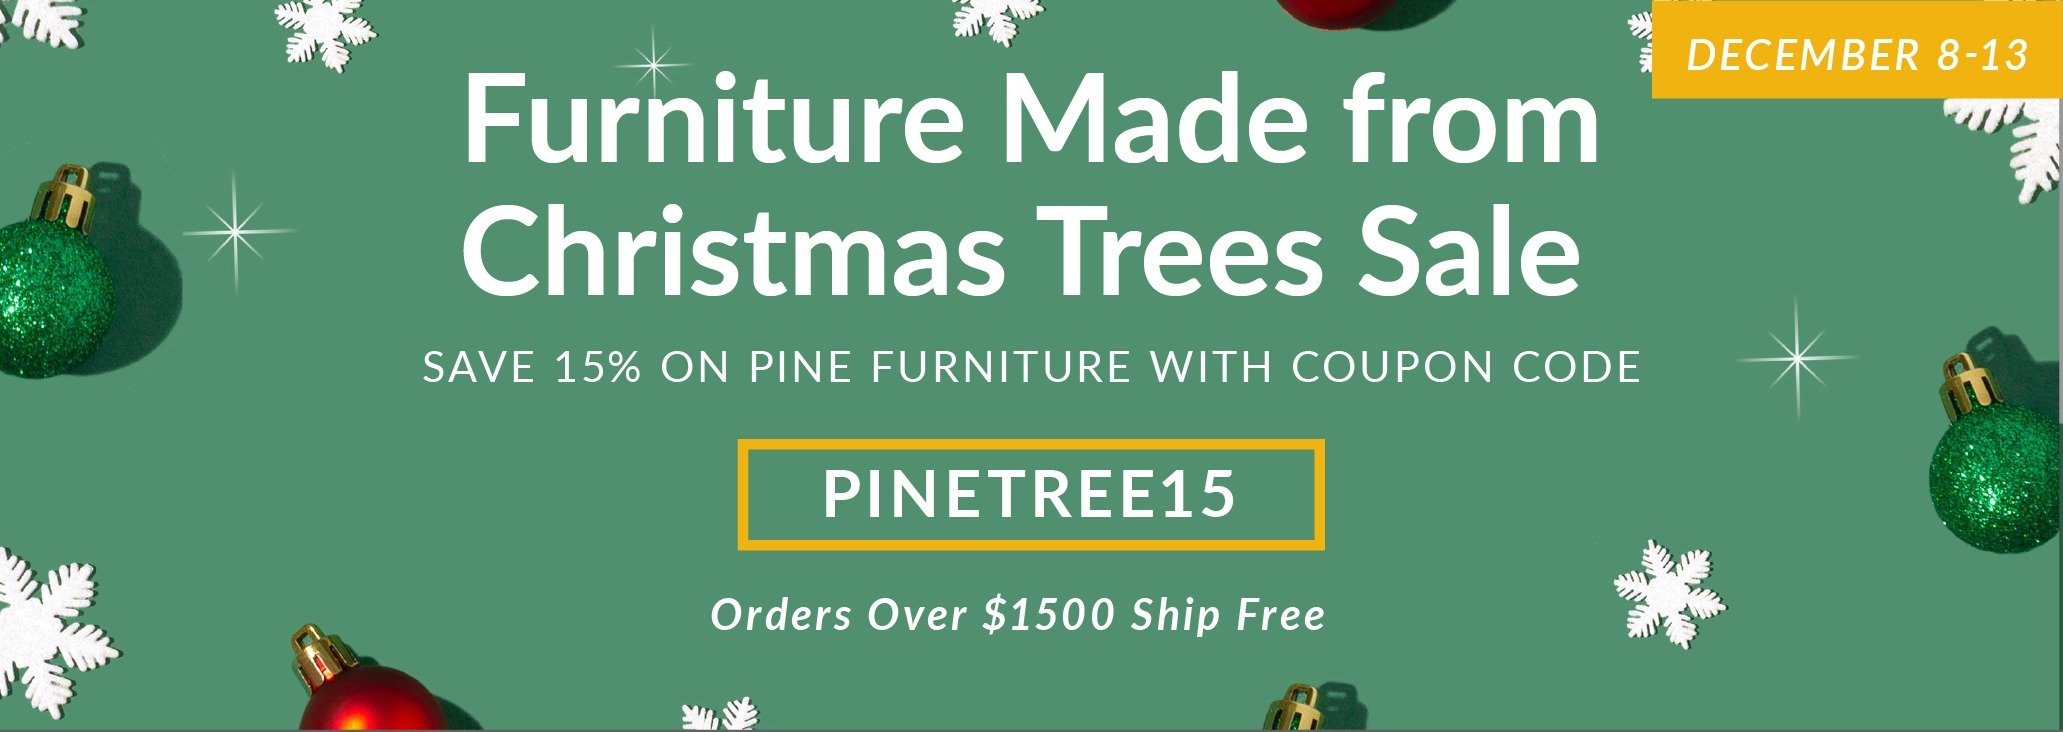 Furniture Made from Christmas Trees Sale